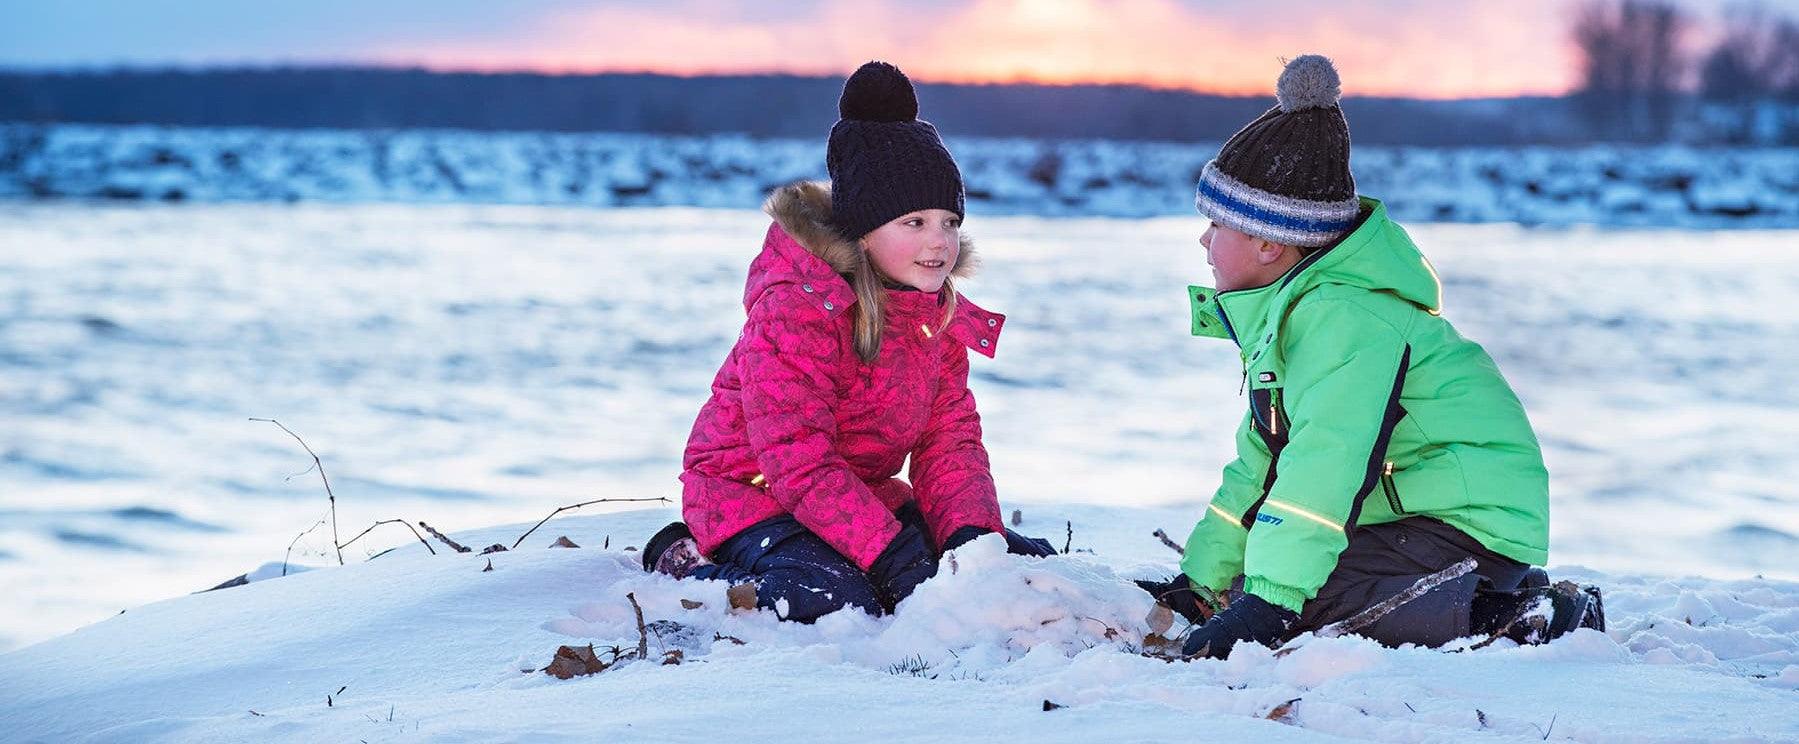 HOW TO CHOOSE THE RIGHT SNOW SUIT FOR YOUR CHILDREN - Goldtex